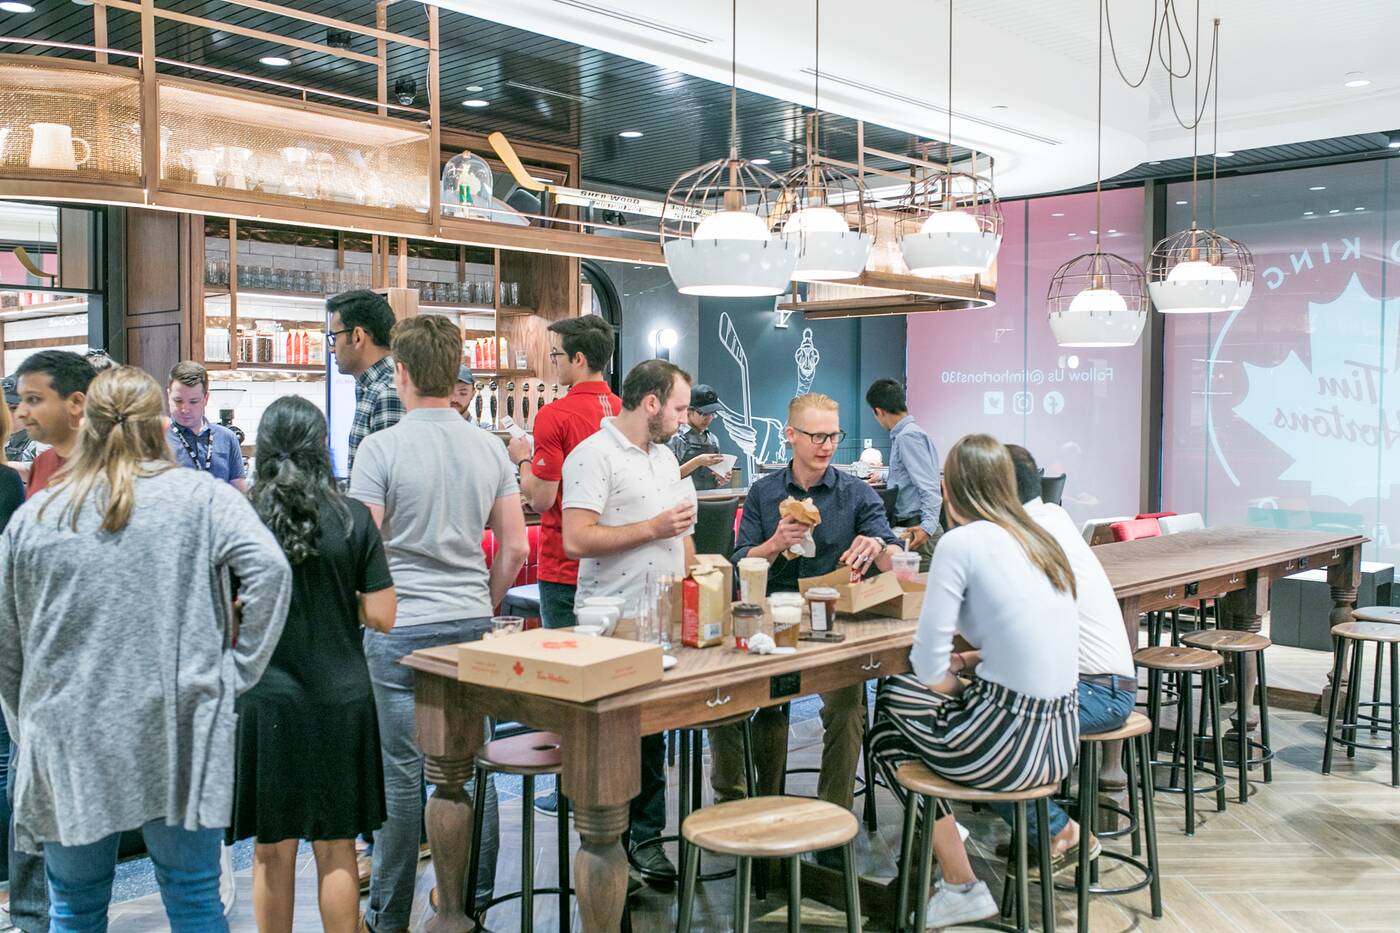 Tim Hortons shuts down their flagship Innovation Cafe in Toronto